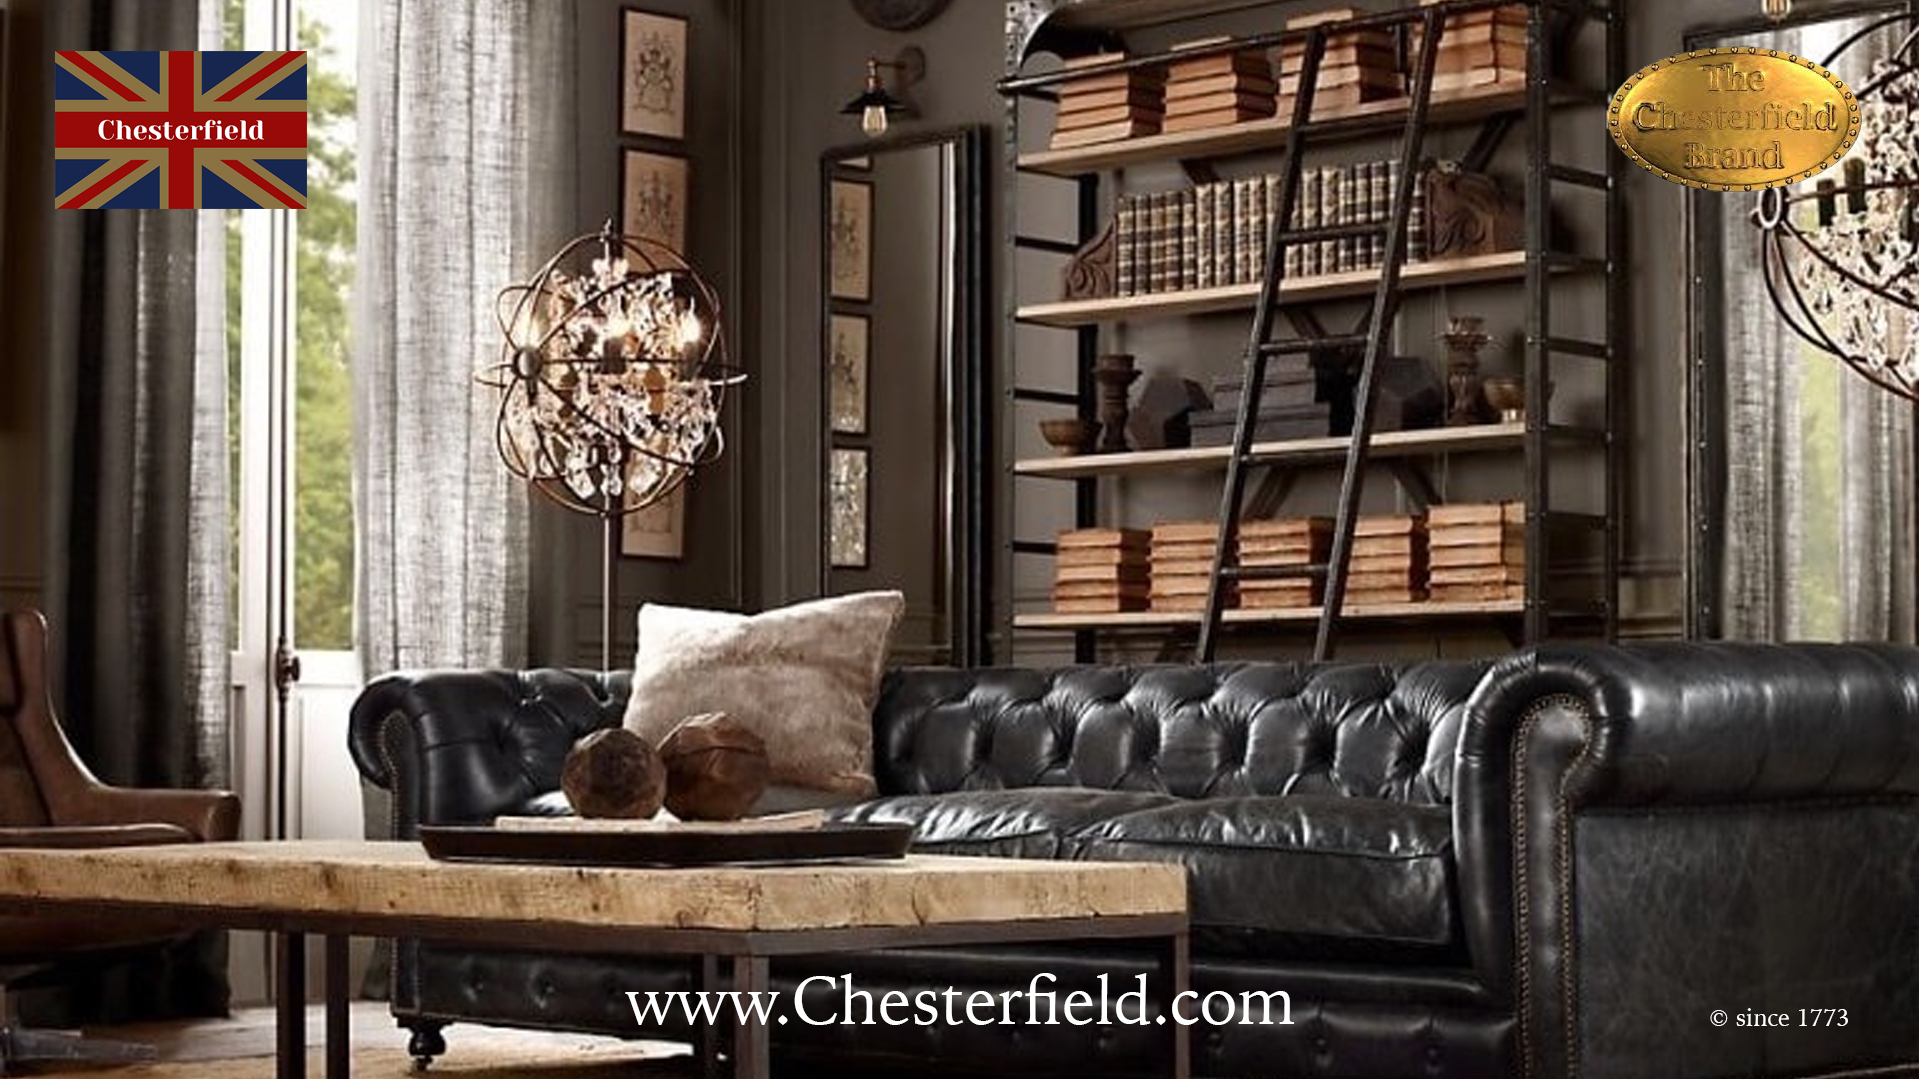 The Chesterfield - Royal Classic and Basic collections | Chesterfield.com